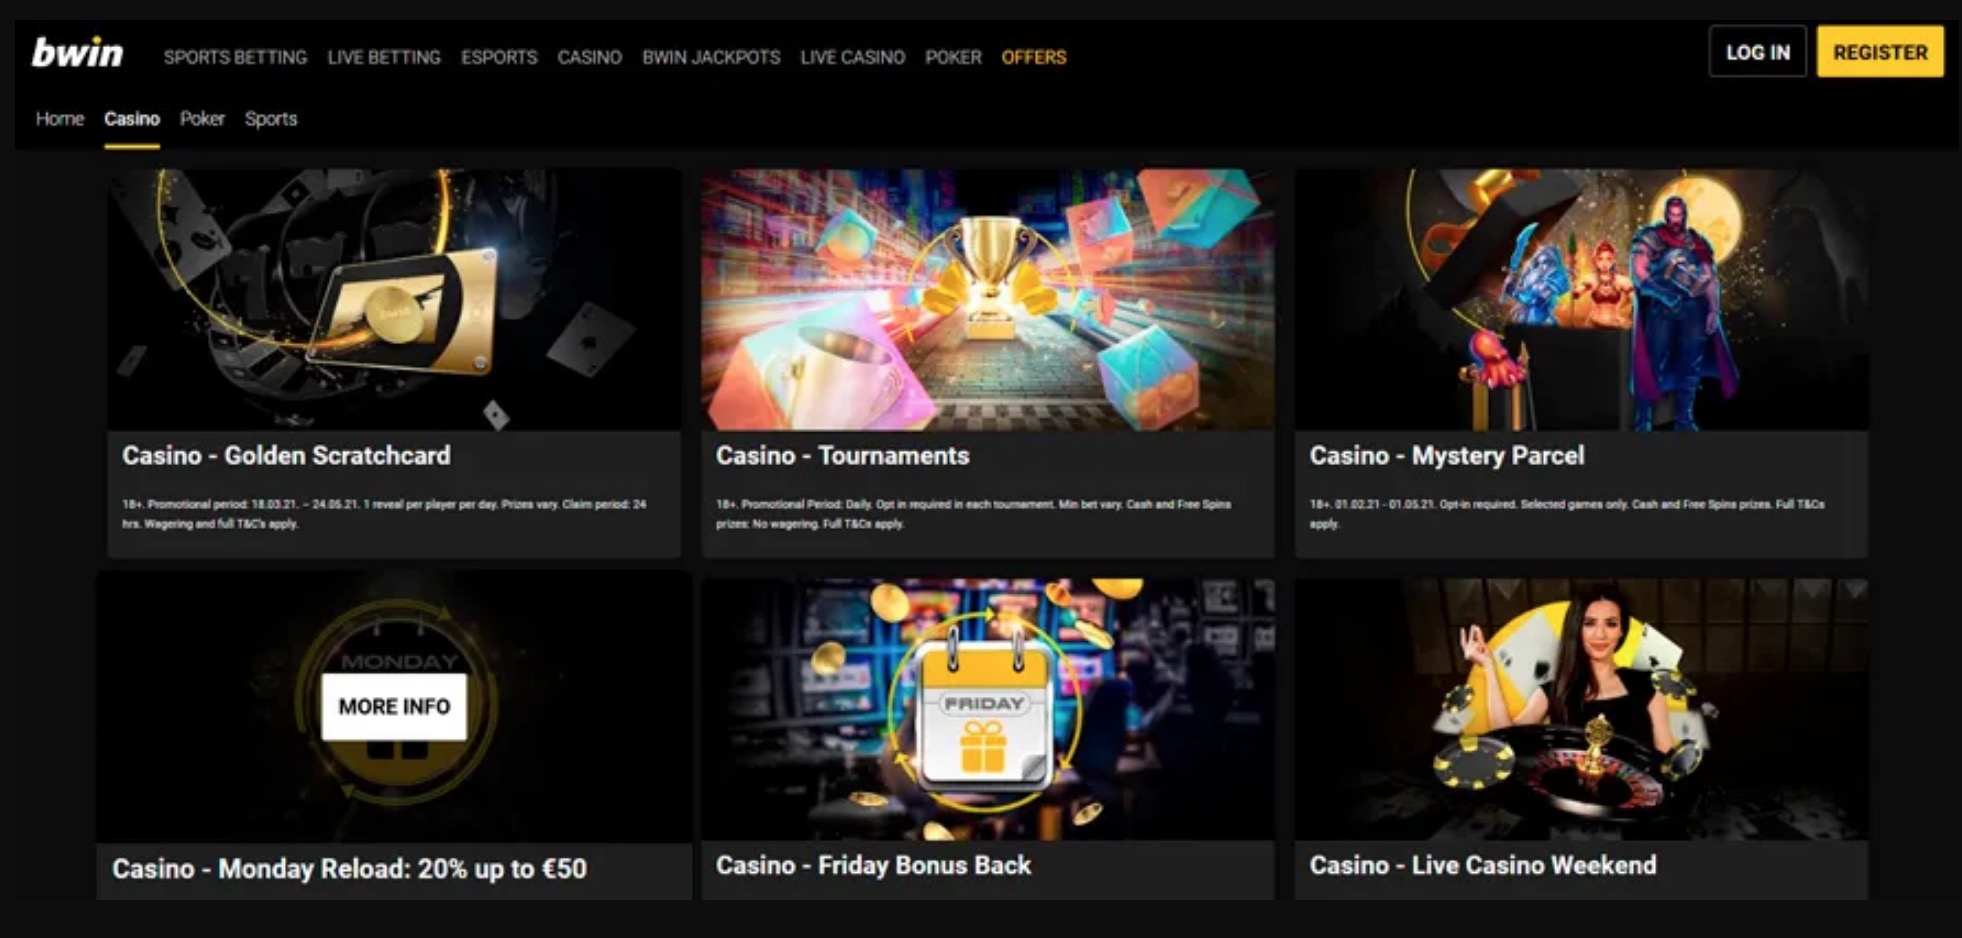 Bwin Casino Bonuses and Promotions